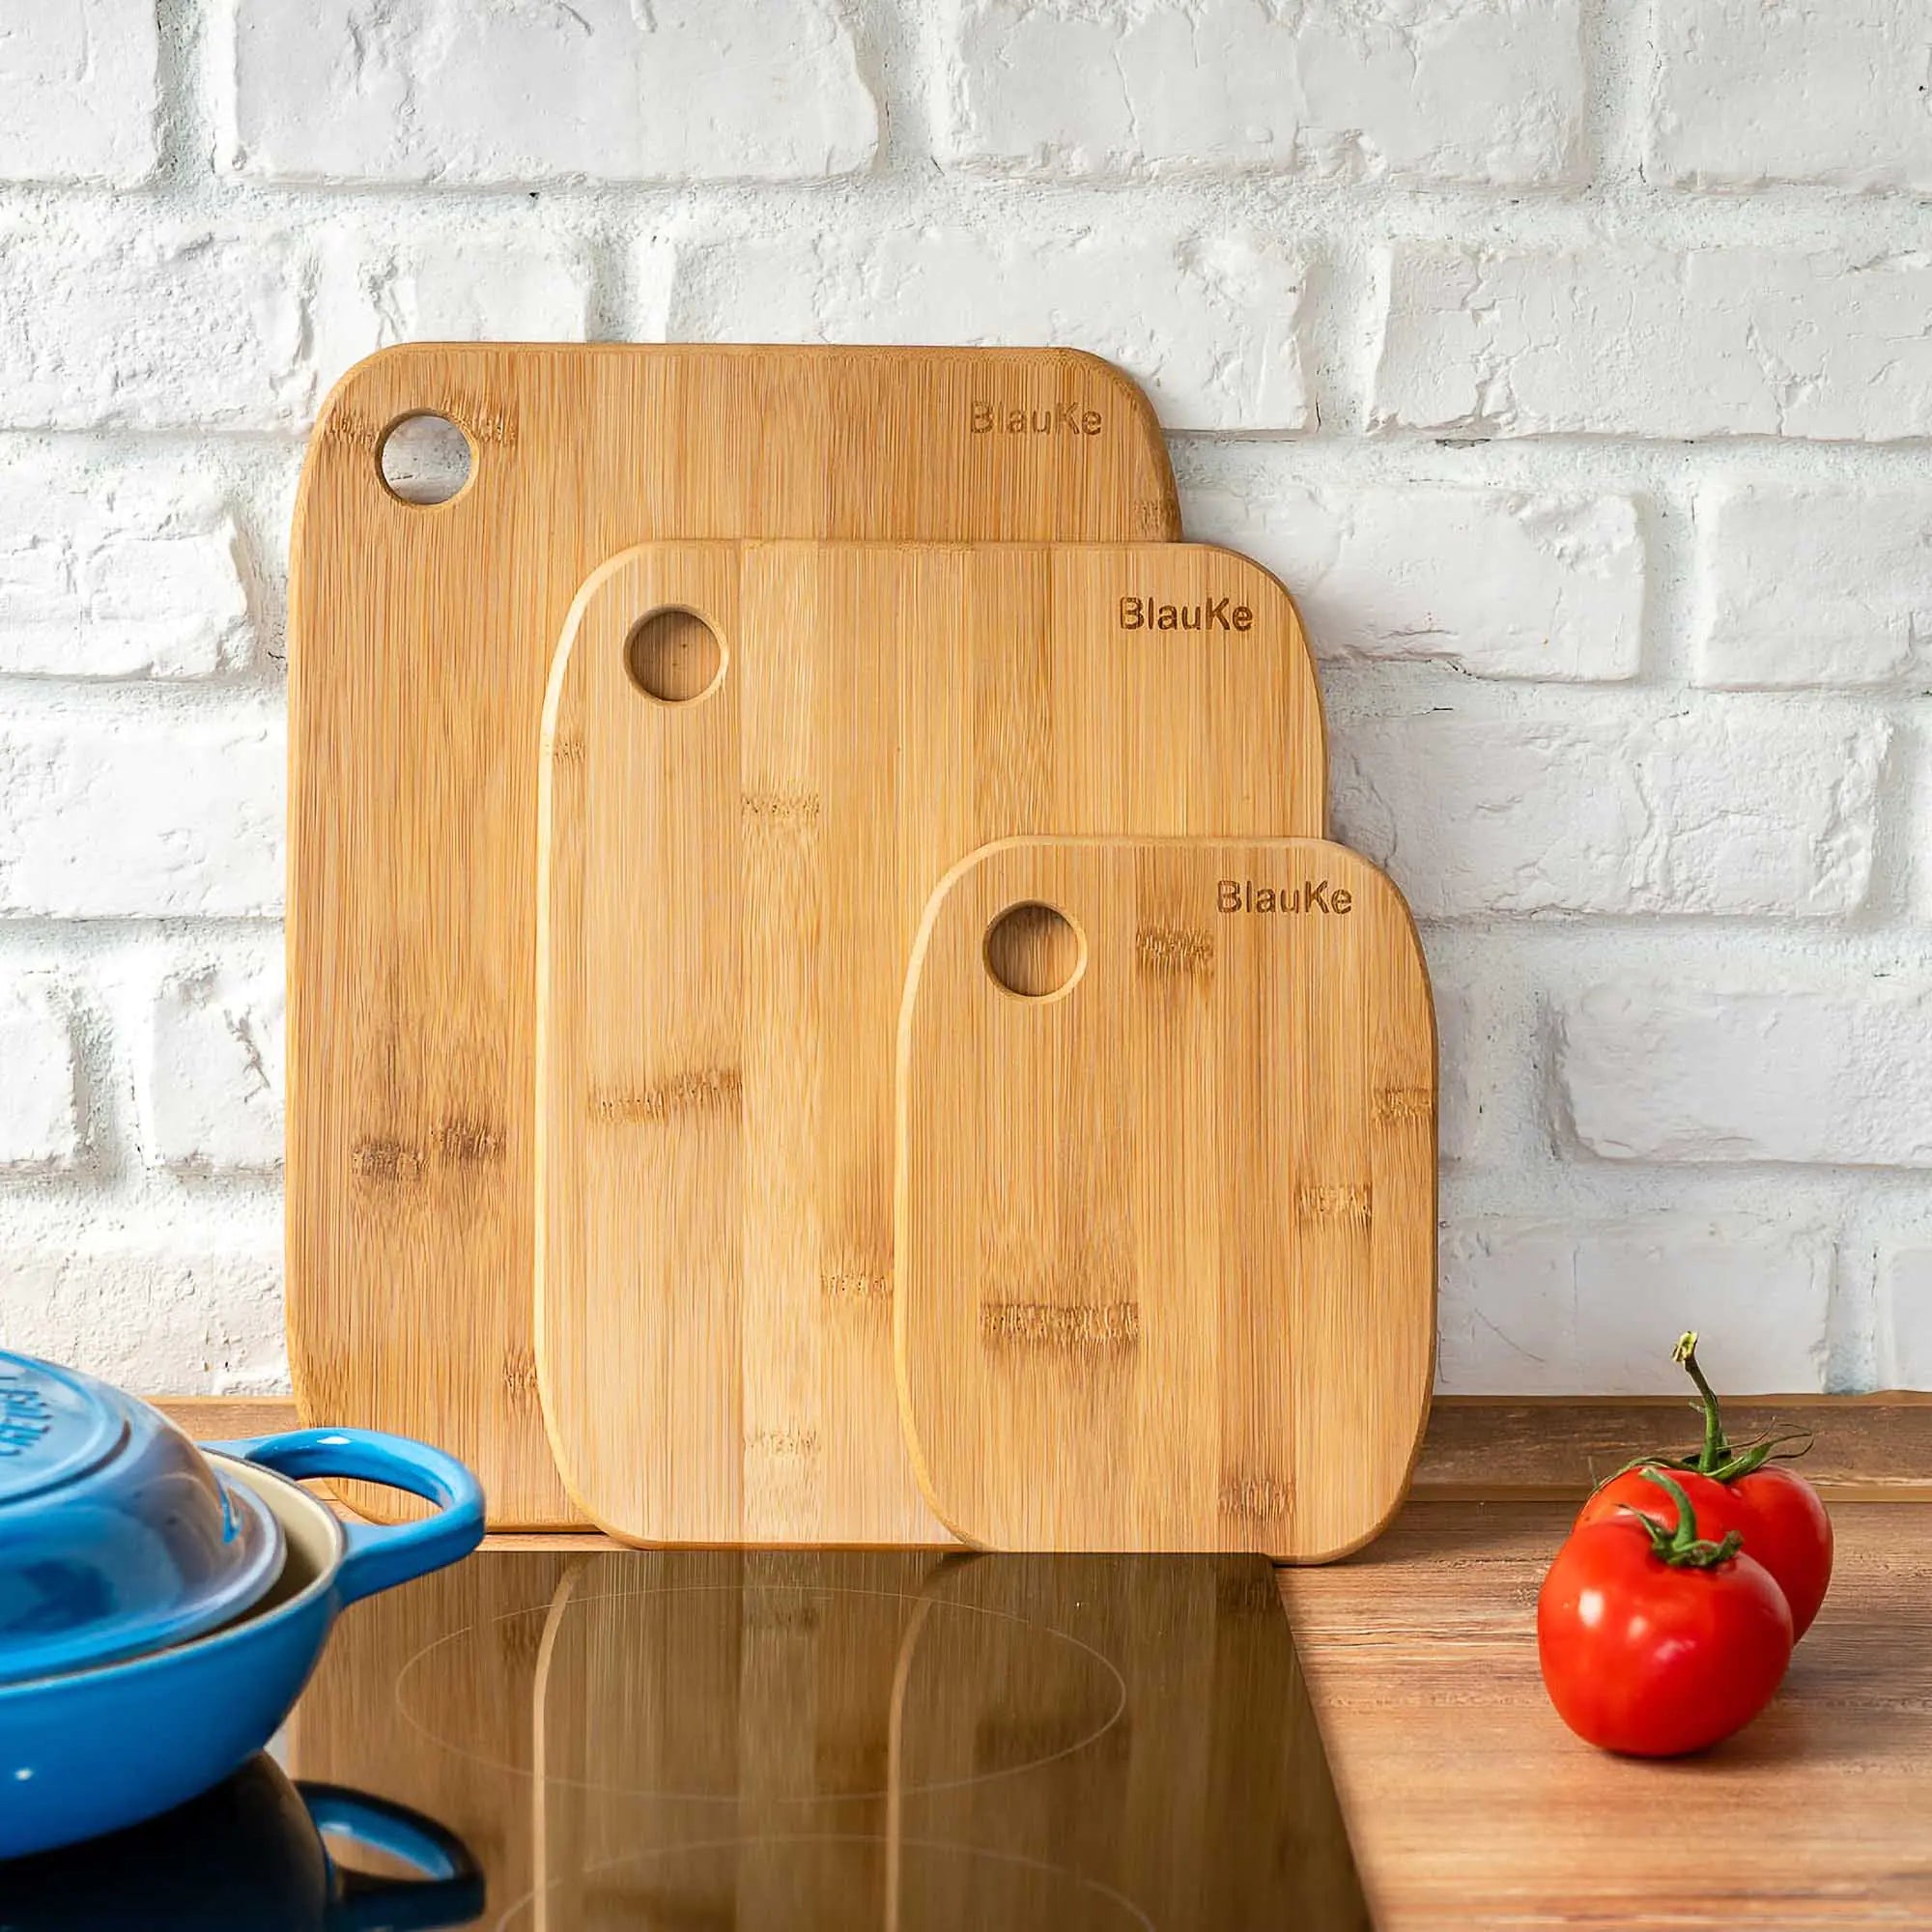 Wooden Cutting Boards for Kitchen - Bamboo Chopping Board Set of 3 - Assortique. Inc